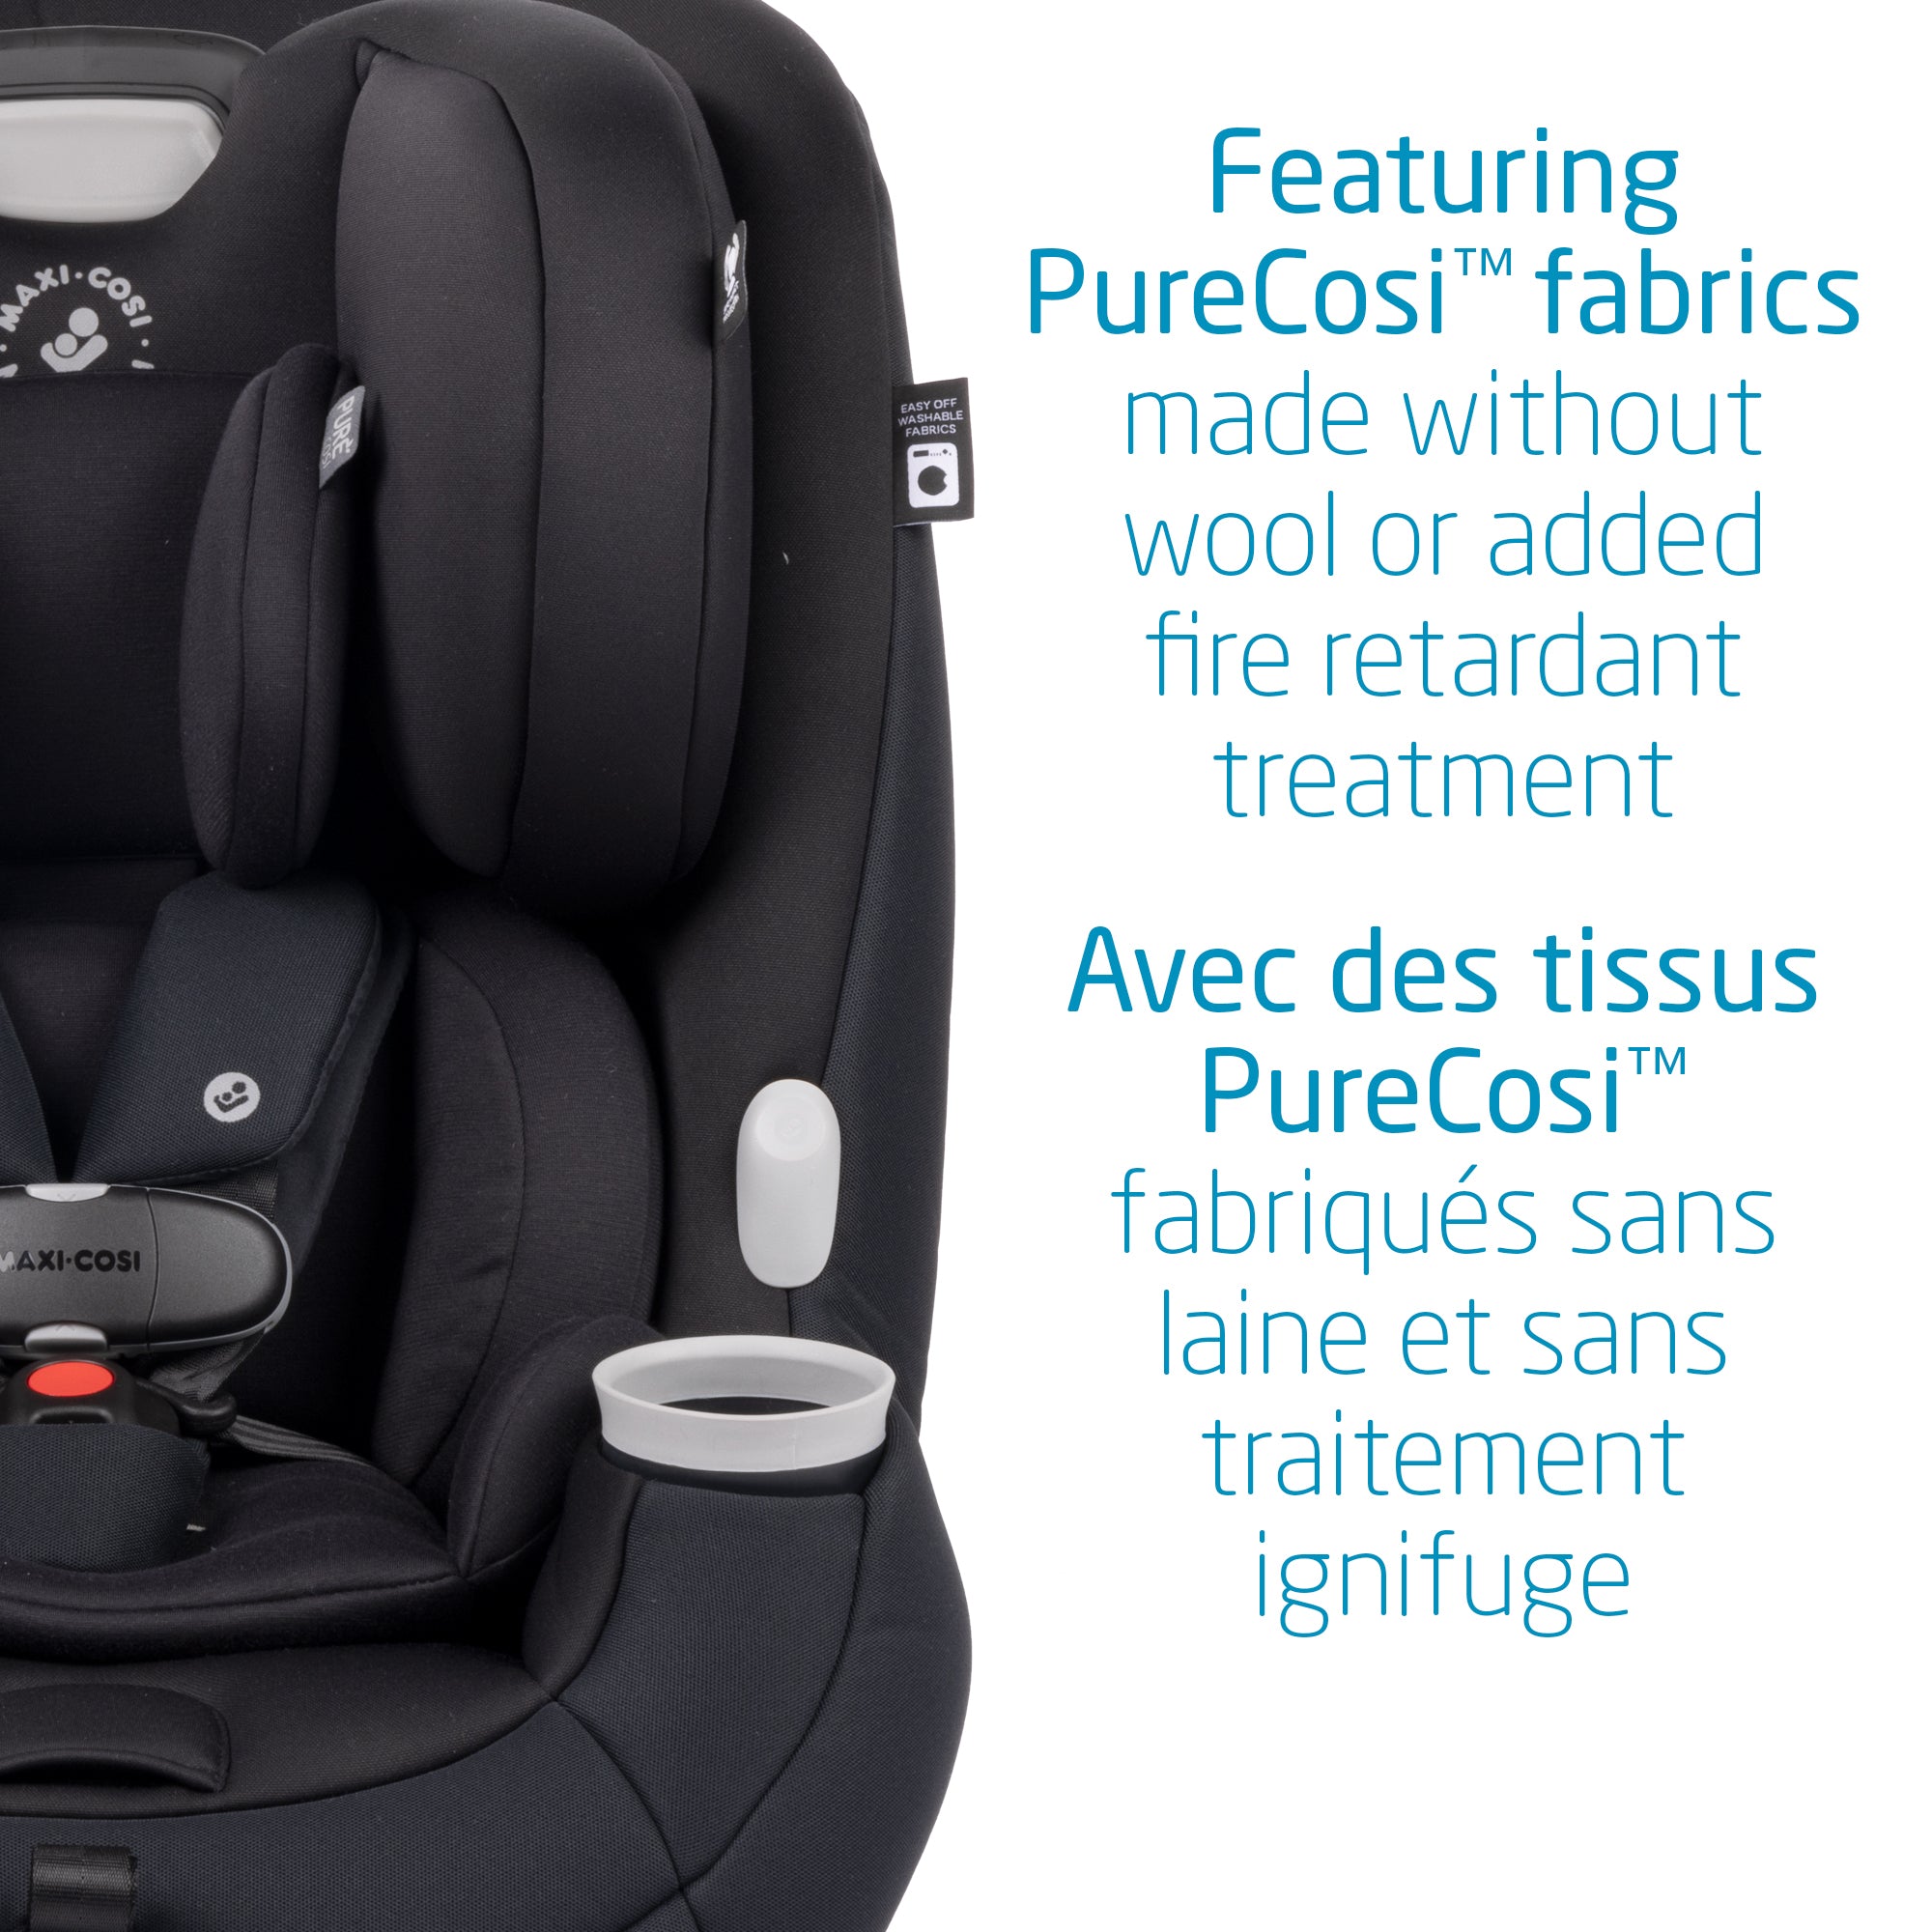 Pria All-in-One Convertible Car Seat